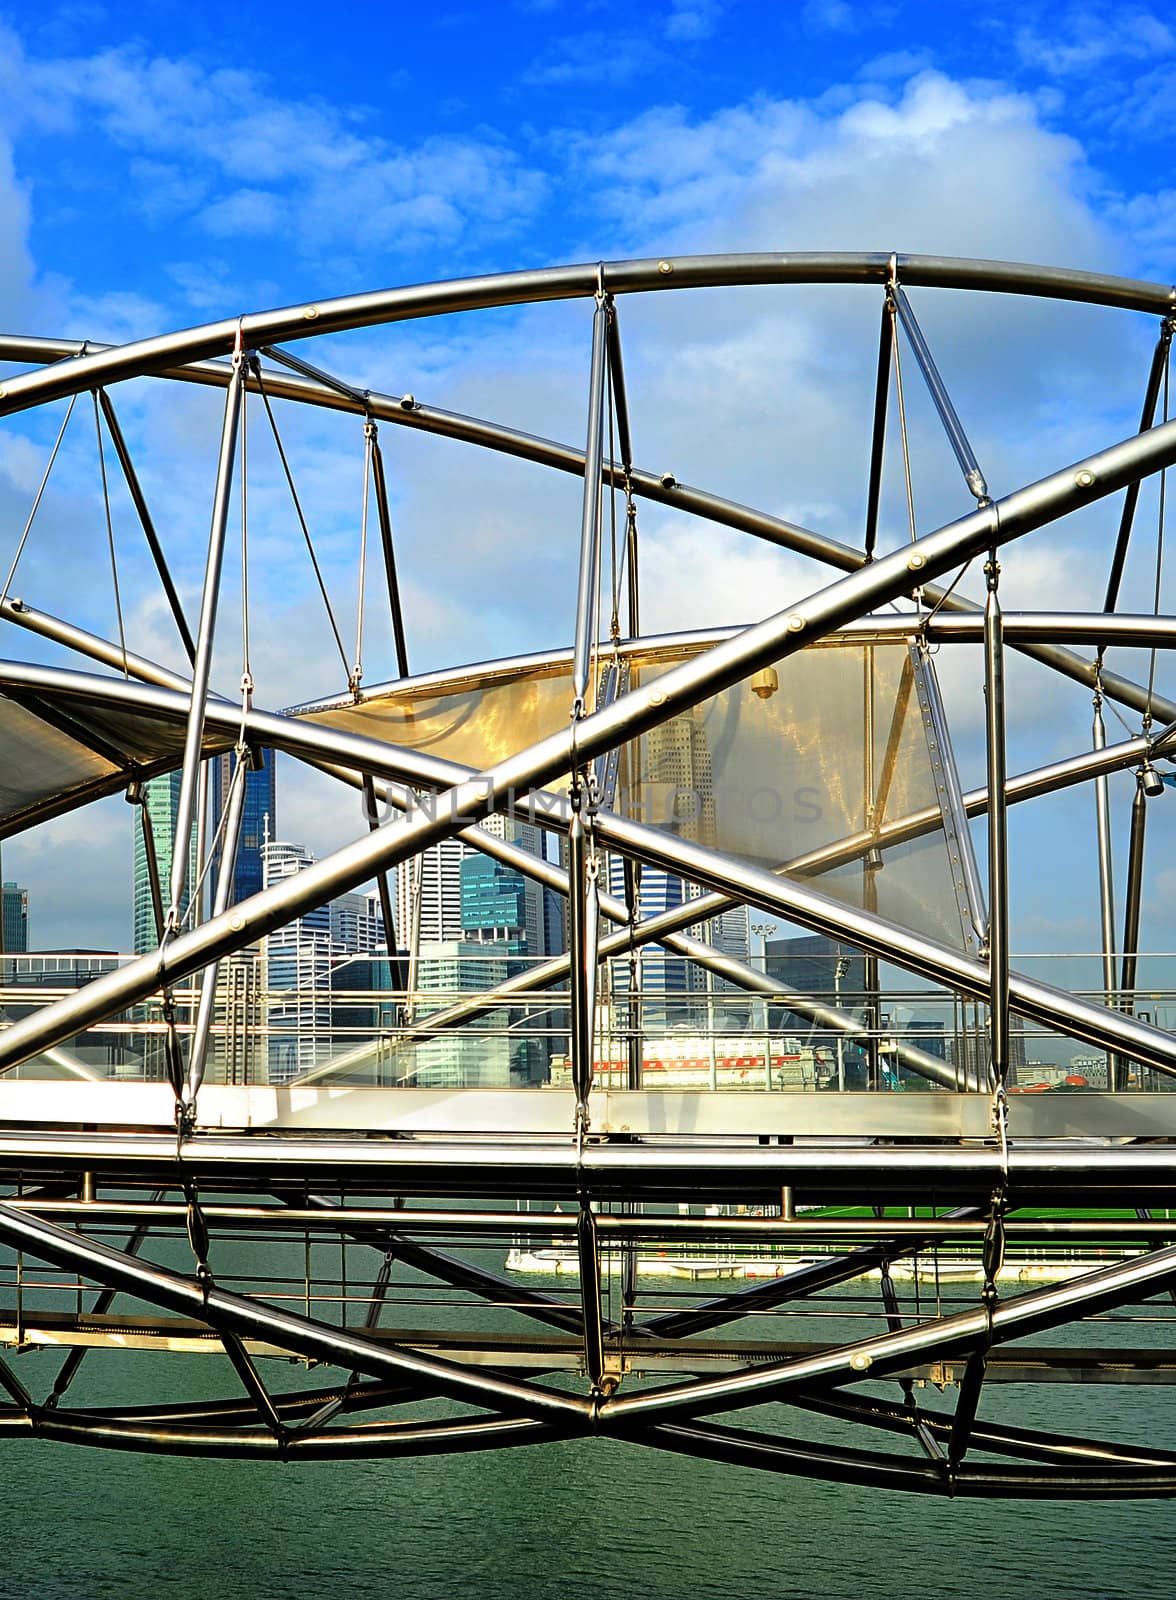 The Helix Bridge , previously known as the Double Helix Bridge , is a pedestrian bridge linking Marina Centre with Marina South in the Marina Bay area in Singapore